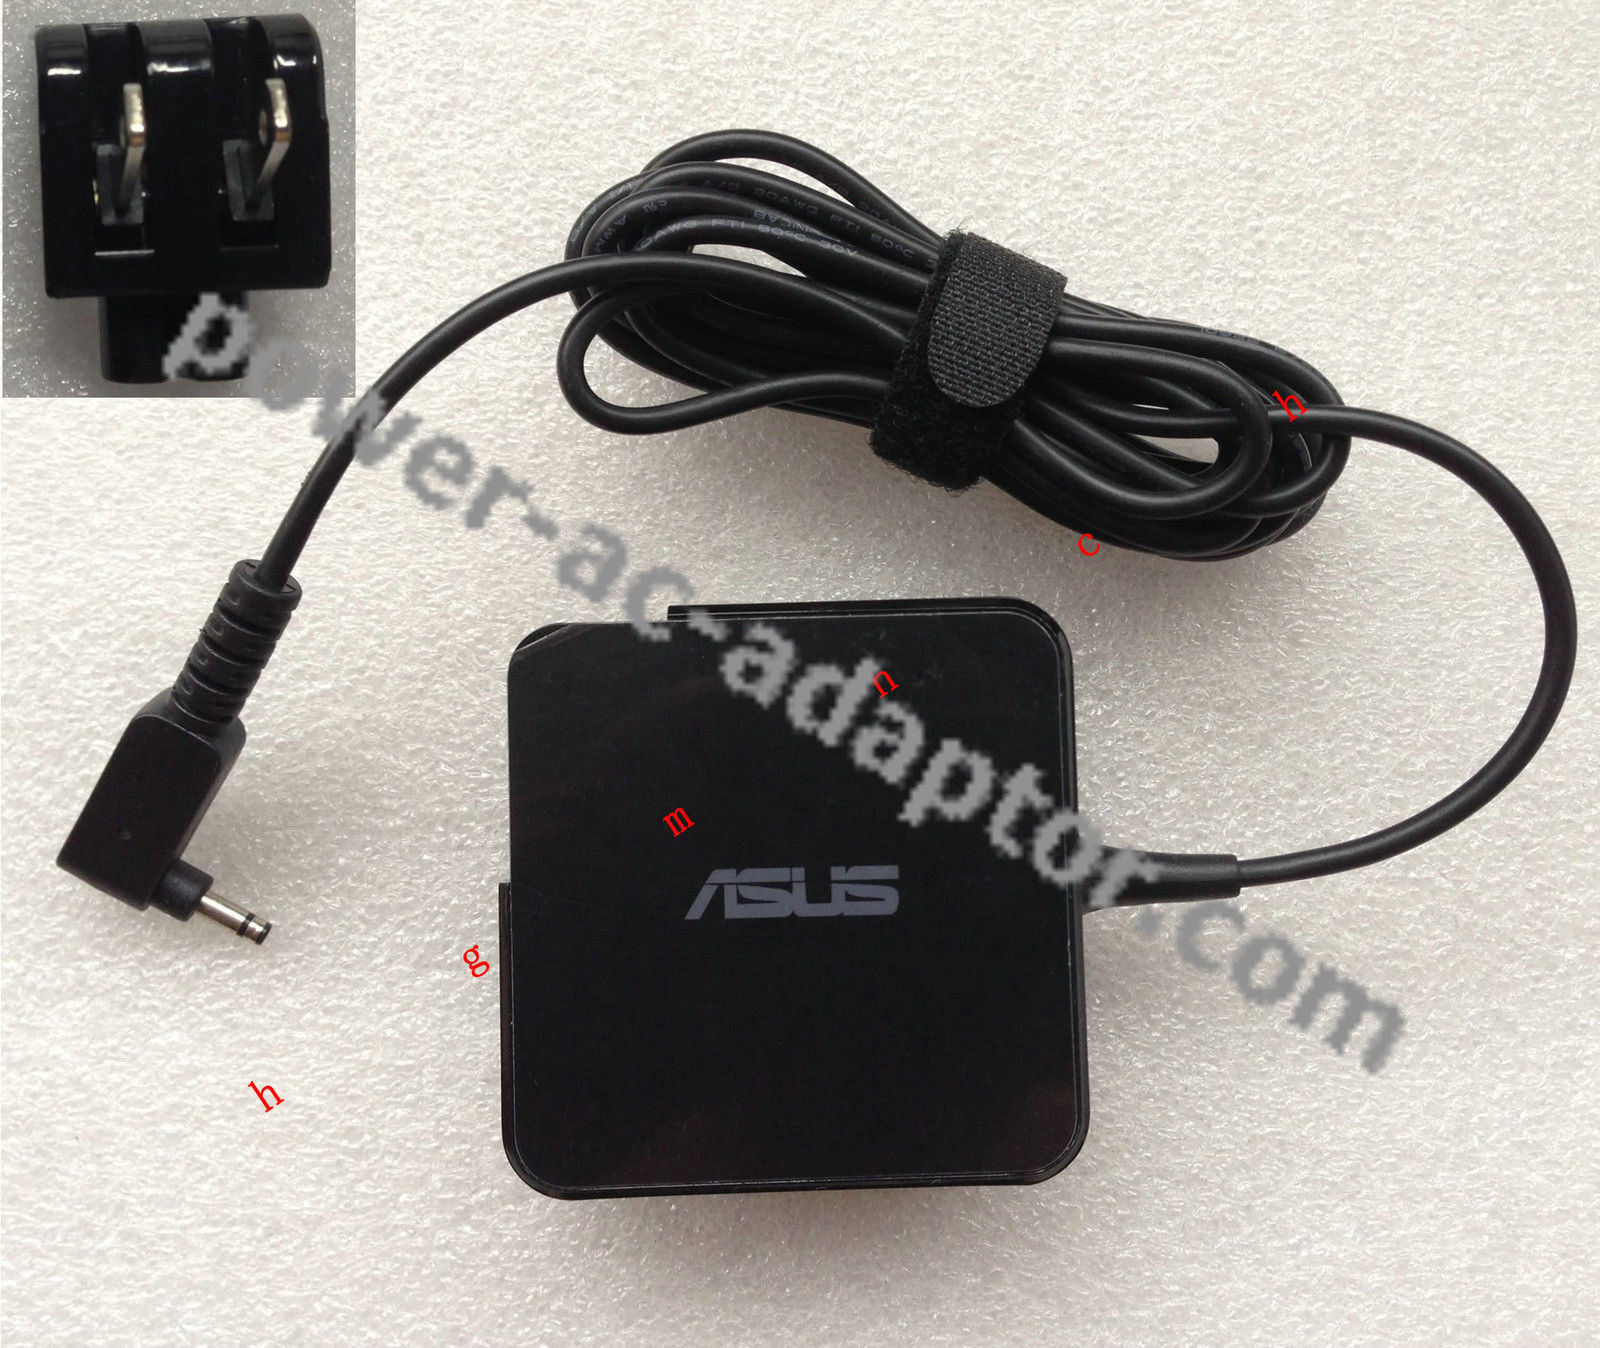 ASUS 45W AC Adapter for ASUS Zenbook UX31E-RY010V Ultrabook